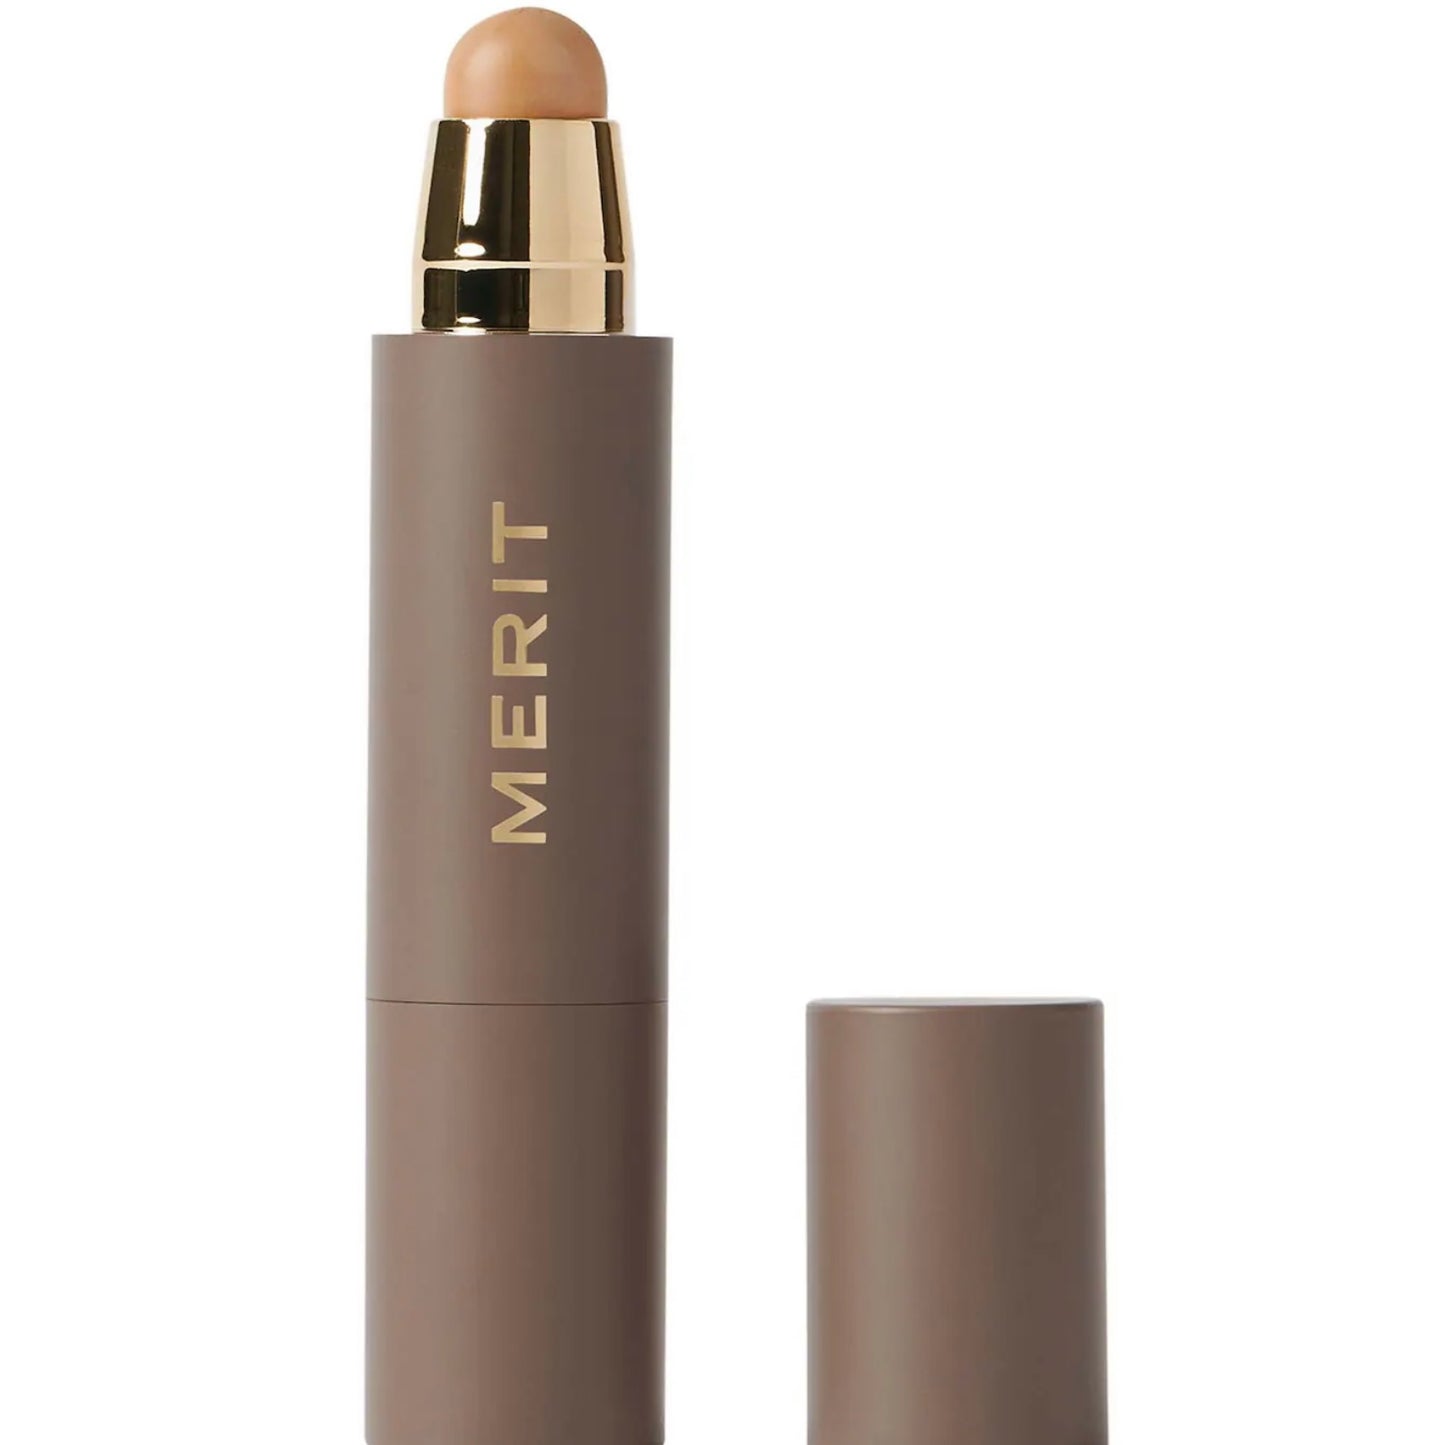 MERIT - The Minimalist Perfecting Complexion Foundation and Concealer Stick